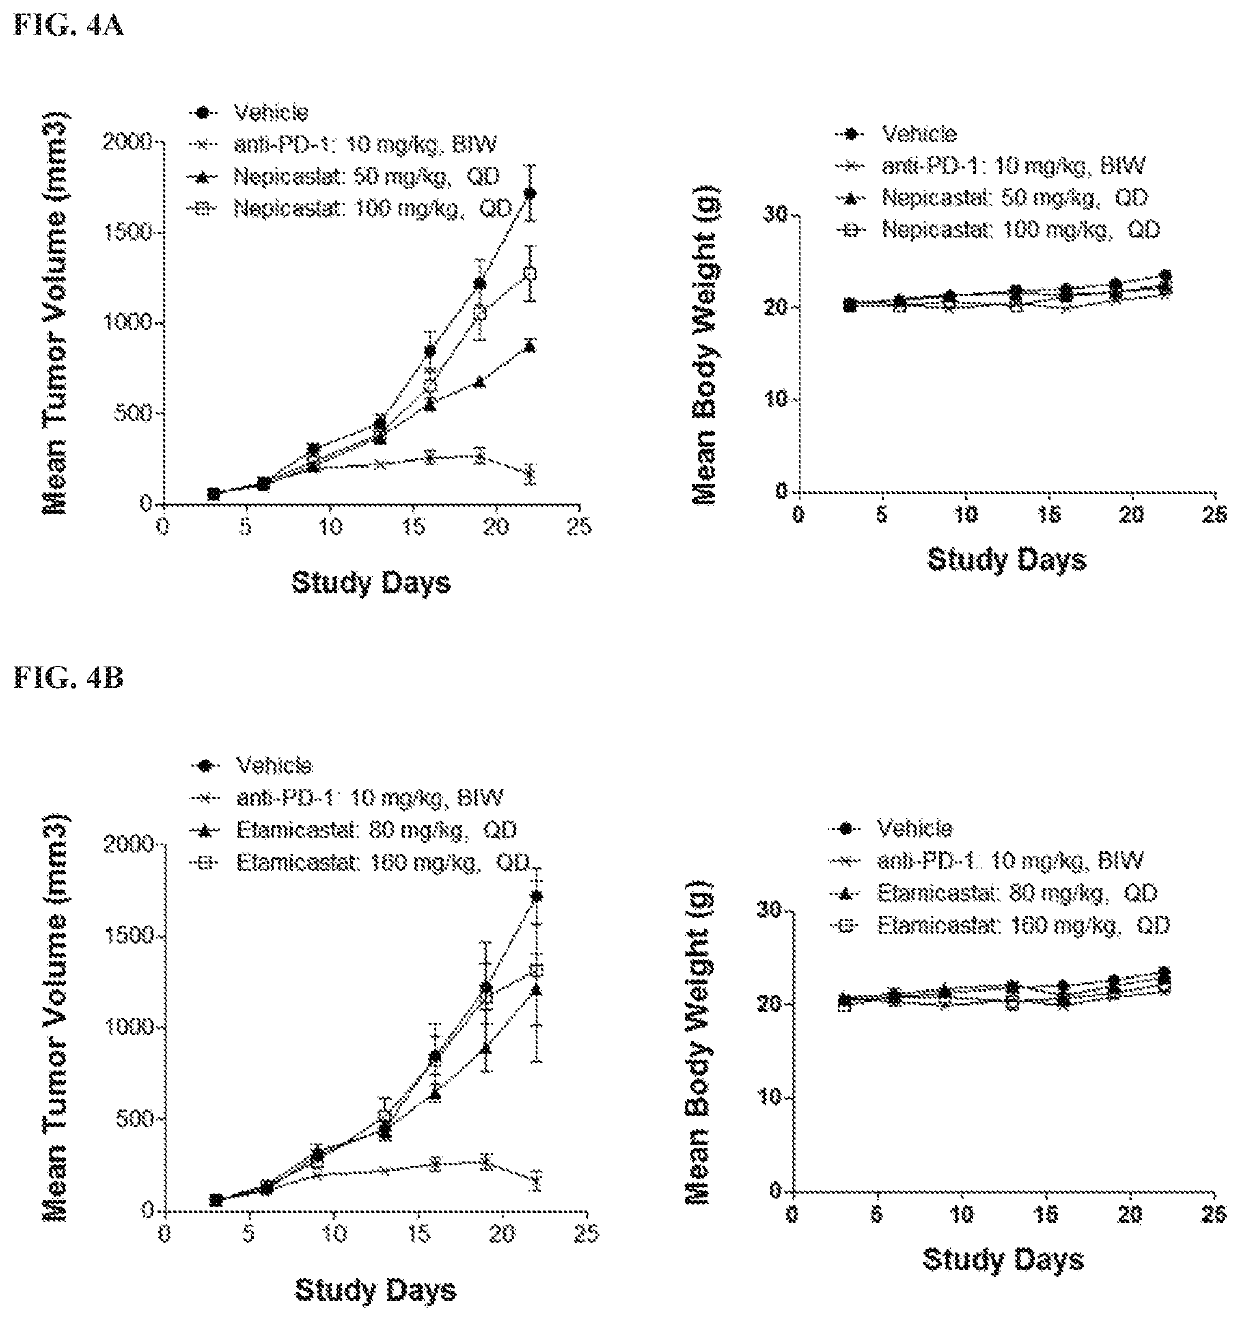 Uses of dopamine beta-hydroxylase (DBH) inhibitors and serotonin receptor (5-HT) antagonists for the treatment of cancer